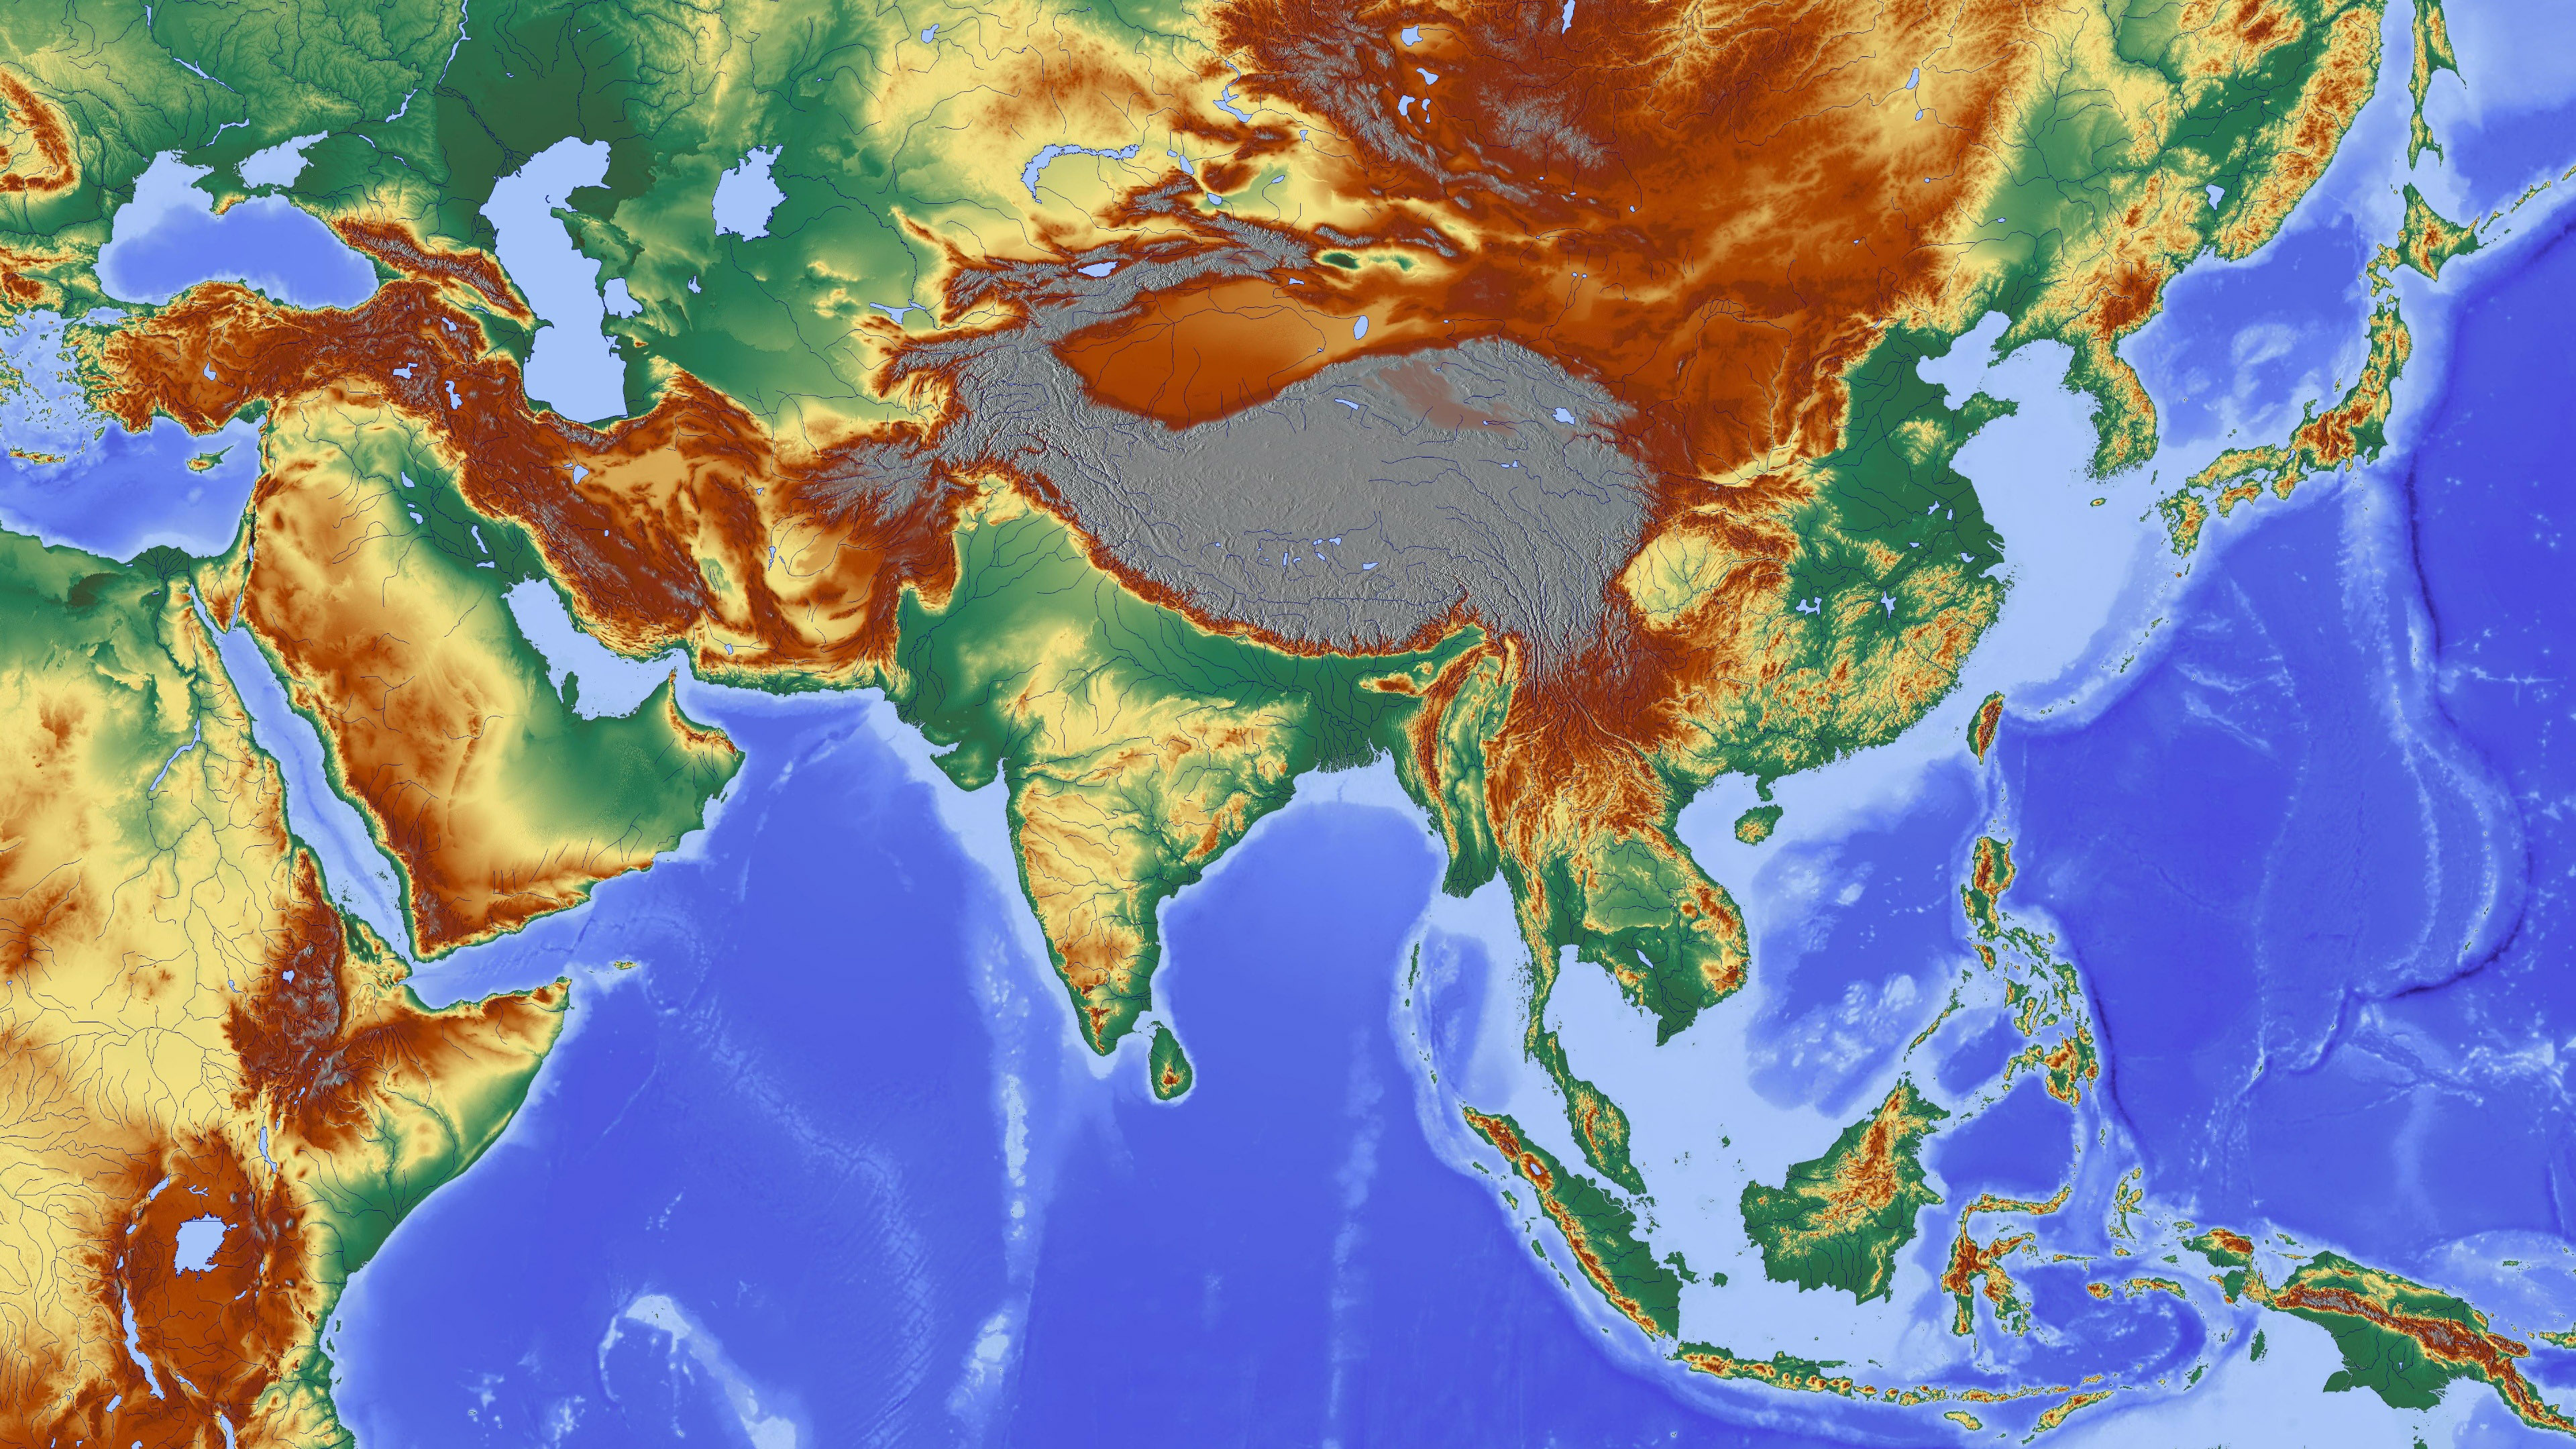 elevation-map-of-asia.jpg